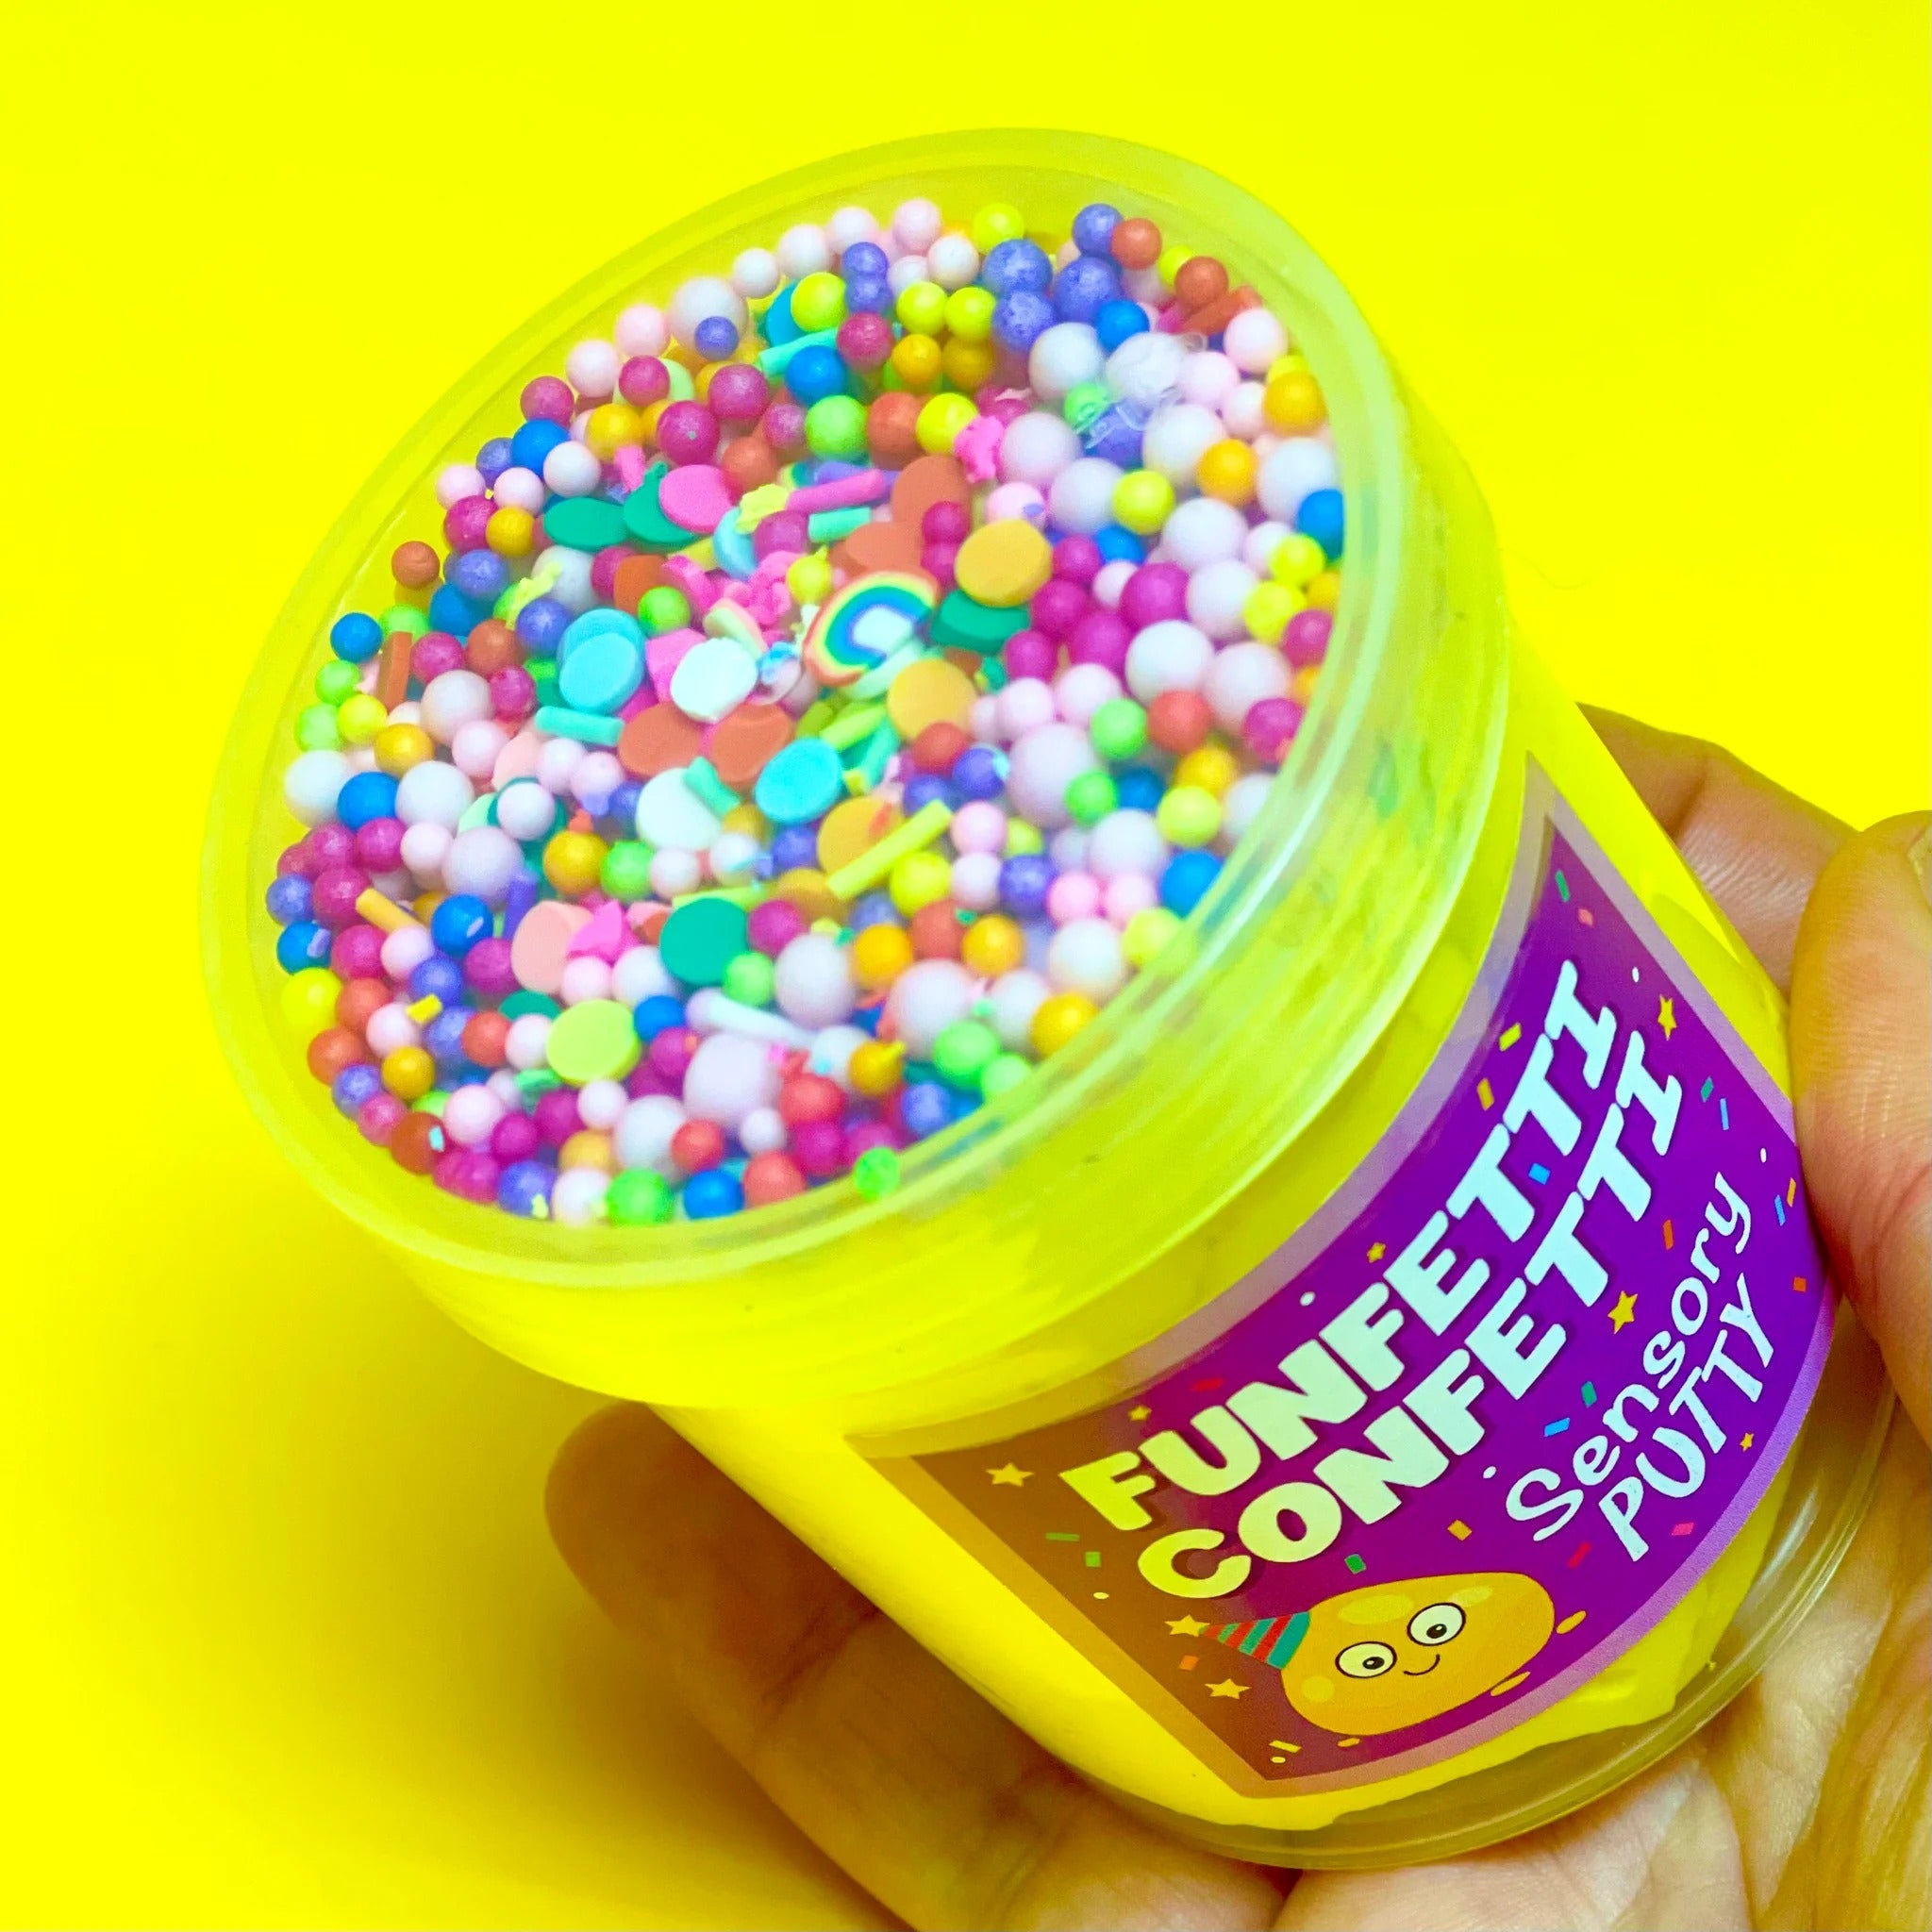 Funfetti Confetti Putty, It's time to celebrate with our funfetti confetti putty! Filled to the brim with rainbow sprinkles, floam balls and stars, that mix perfectly with our gentle sweet scent, yellow putty to create a sensory party in a pot! Putties are air reactive and will dry out of left out. Always return to the container after play with the lid tightly on. Keep away from direct sunlight. Keep away from fabrics and porous surfaces. Container Size: 275ml Ages 5+, Adult supervision recommended. Funfett